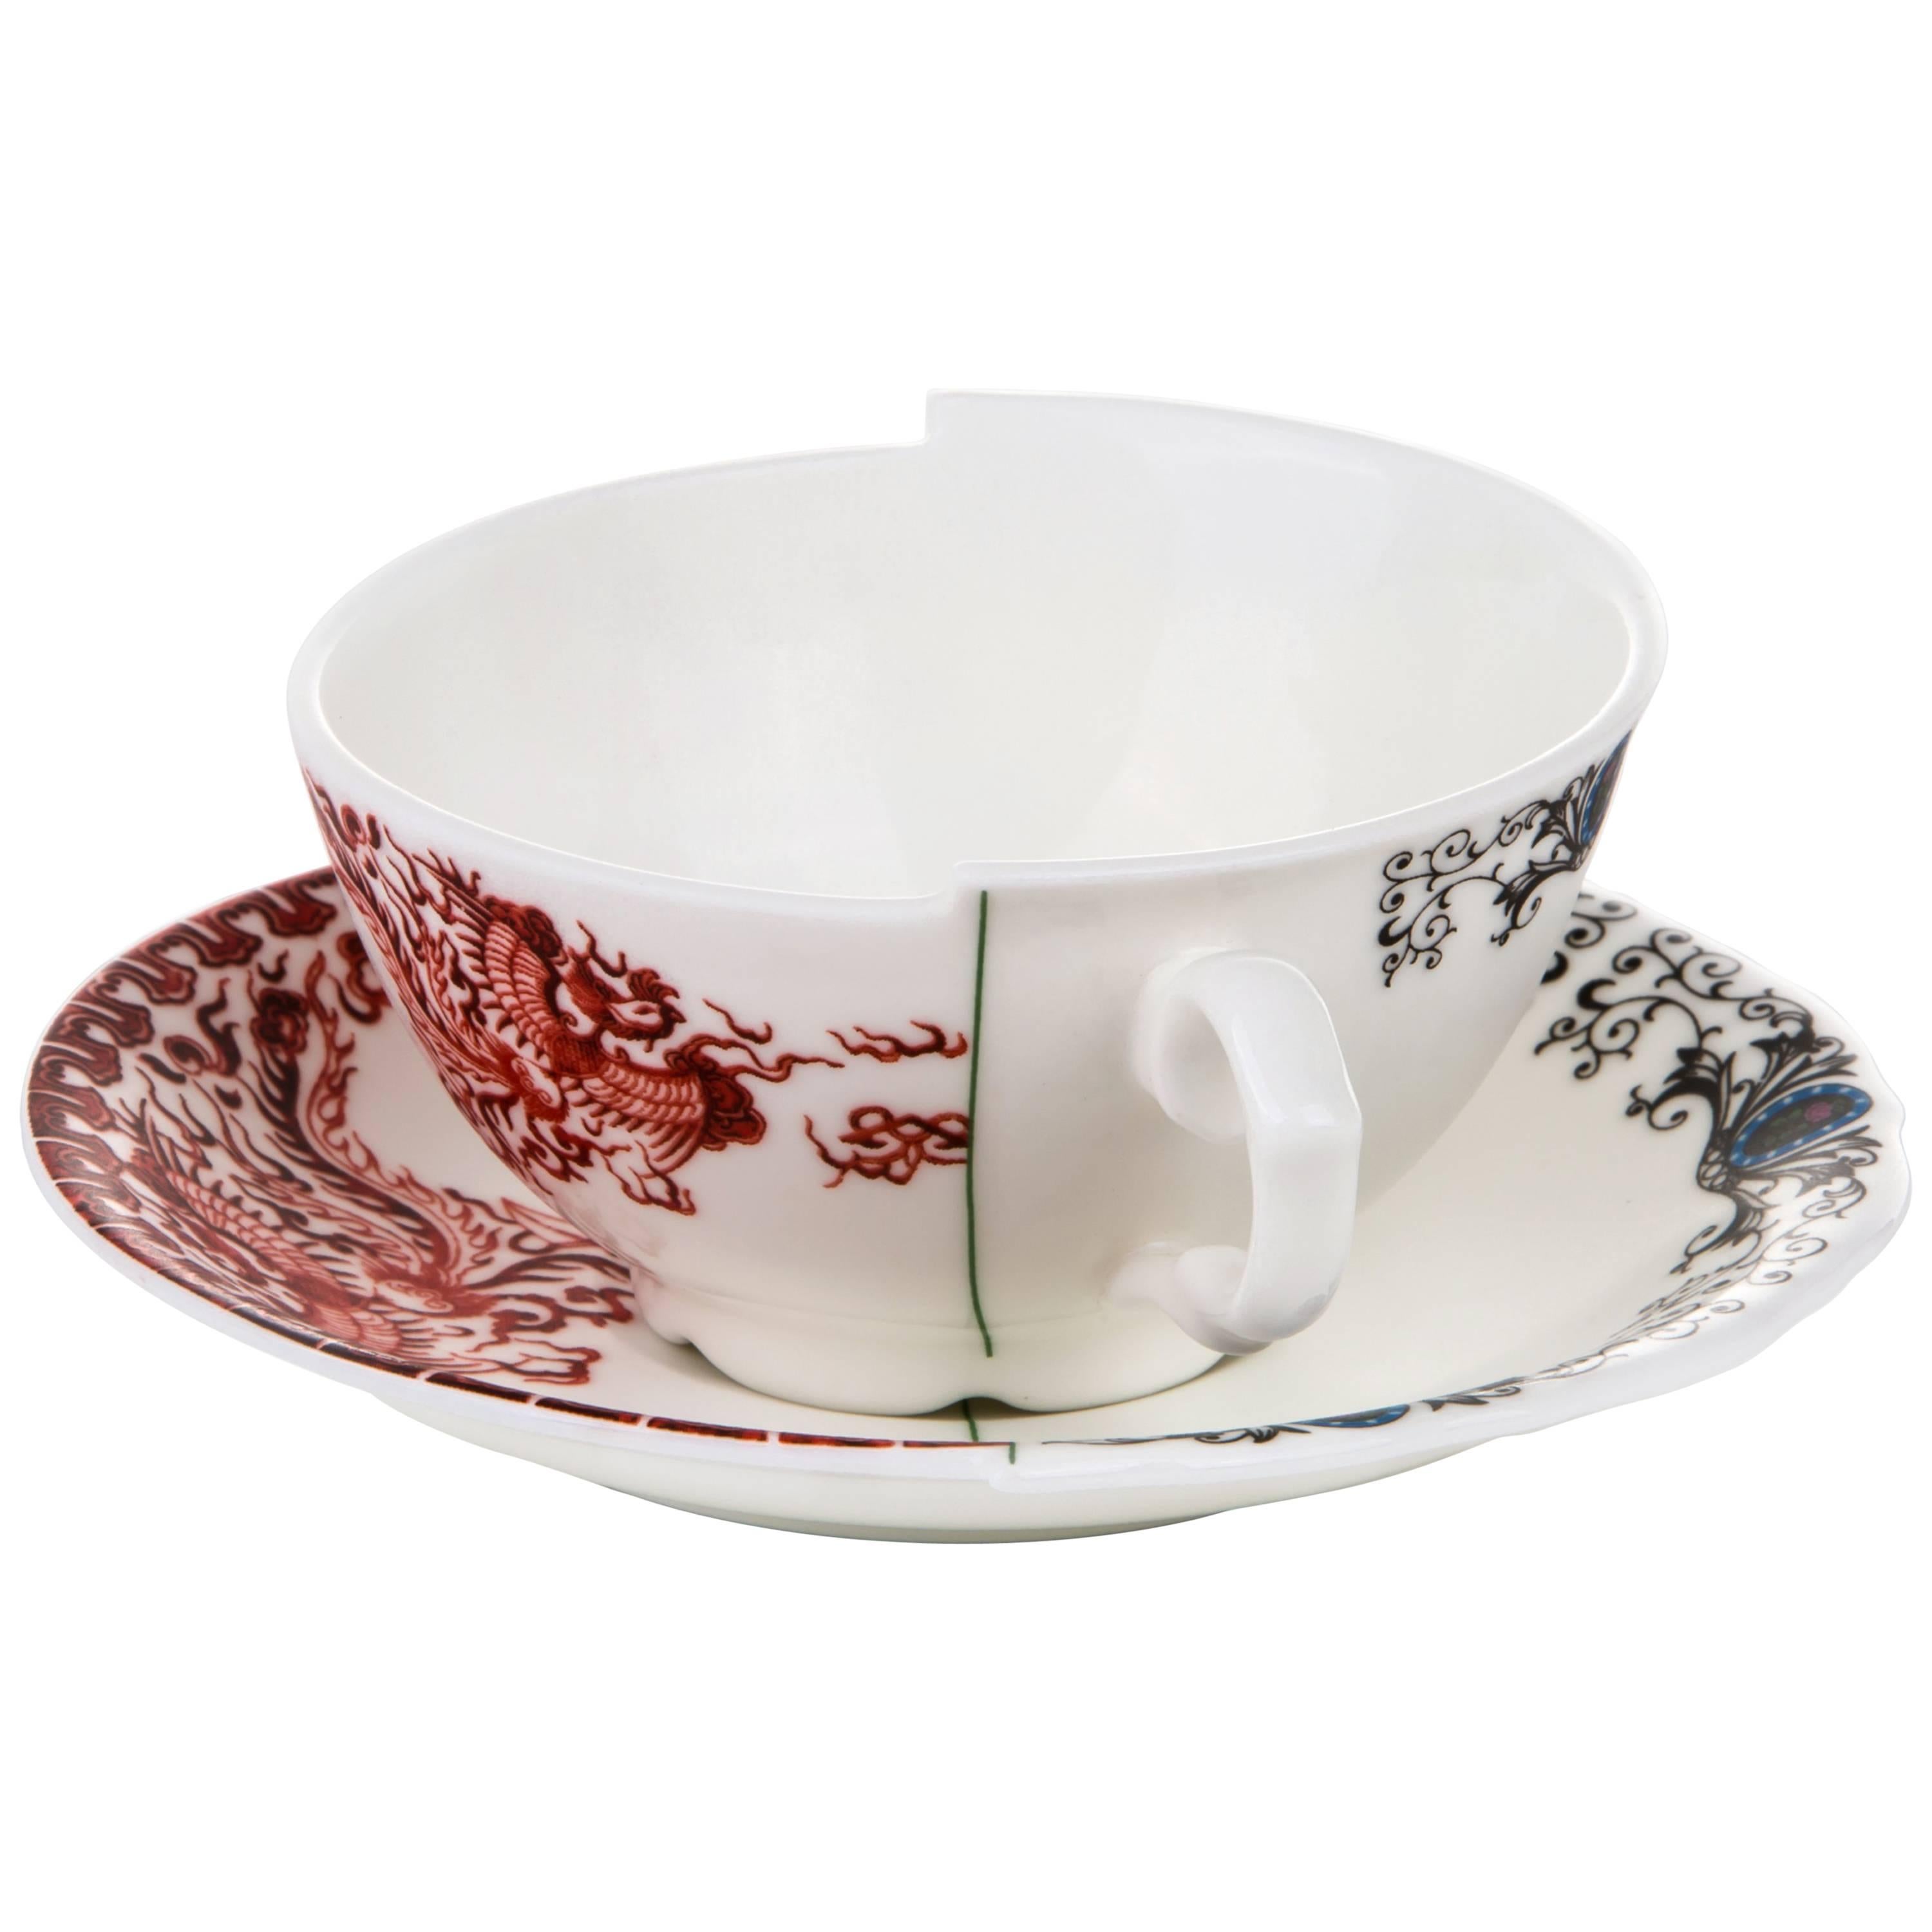 Seletti "Hybrid-Zora" Teacup with Saucer in Porcelain For Sale